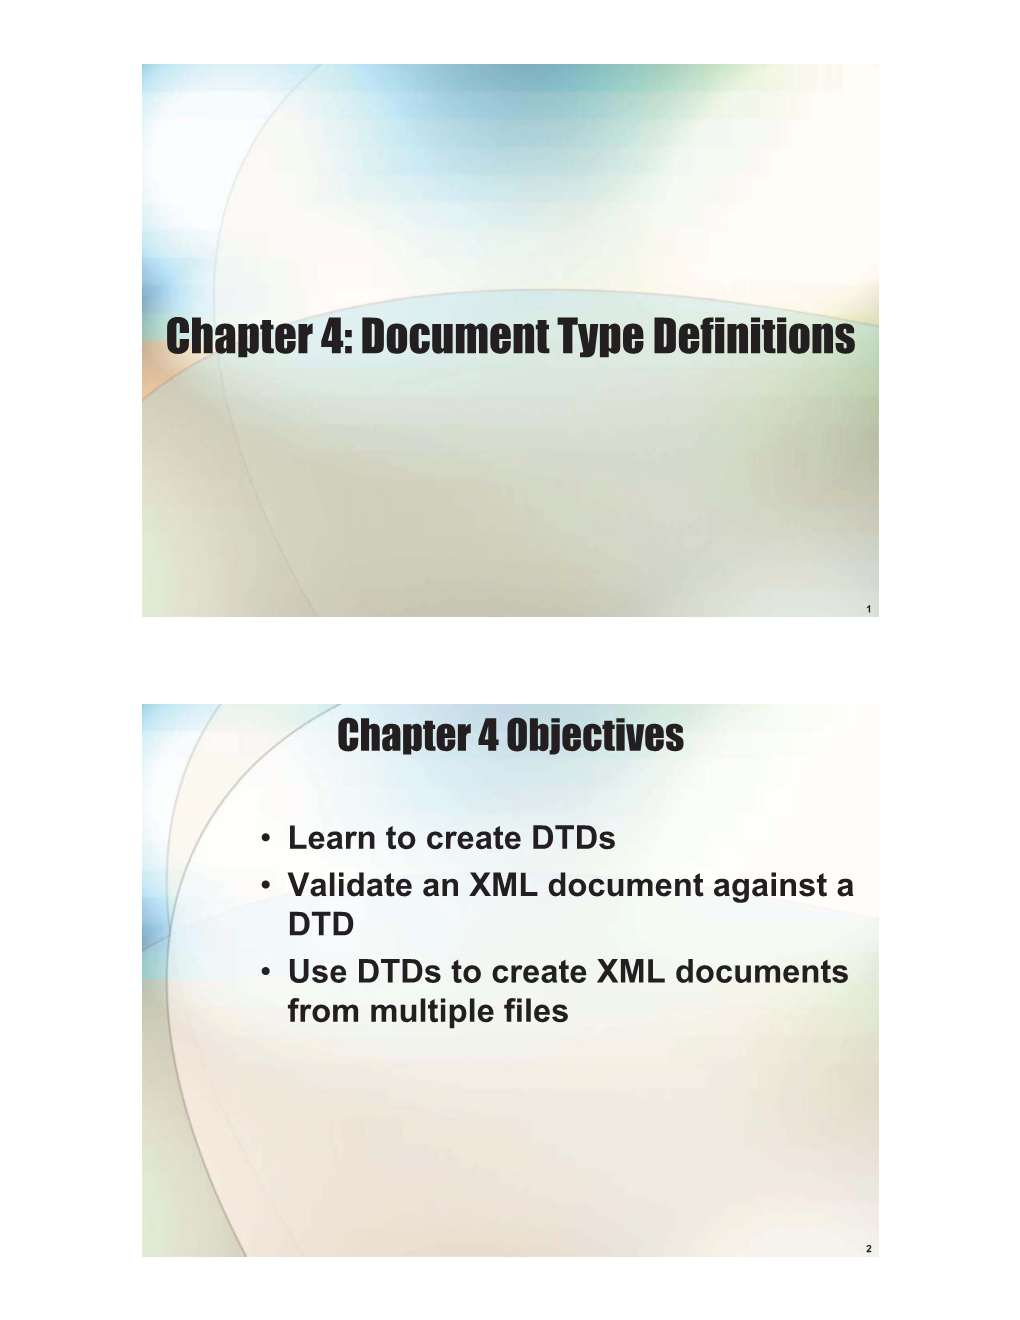 Chapter 4: Document Type Definitions